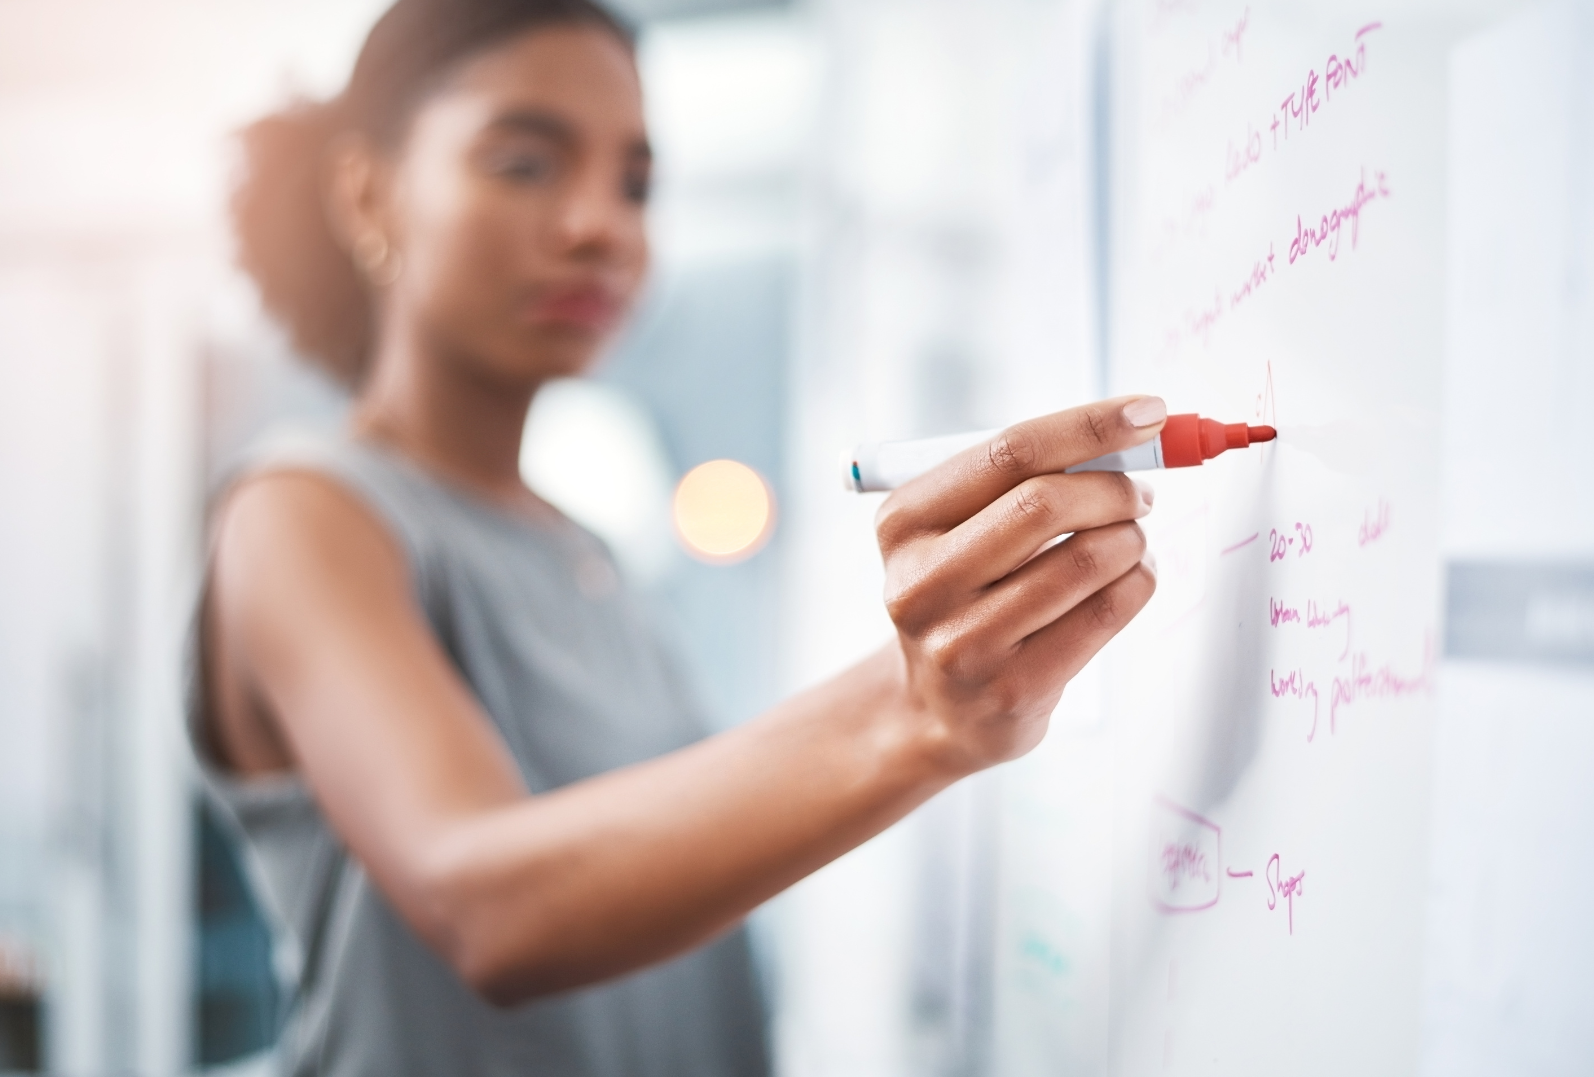 Young woman brainstorming on a whiteboard